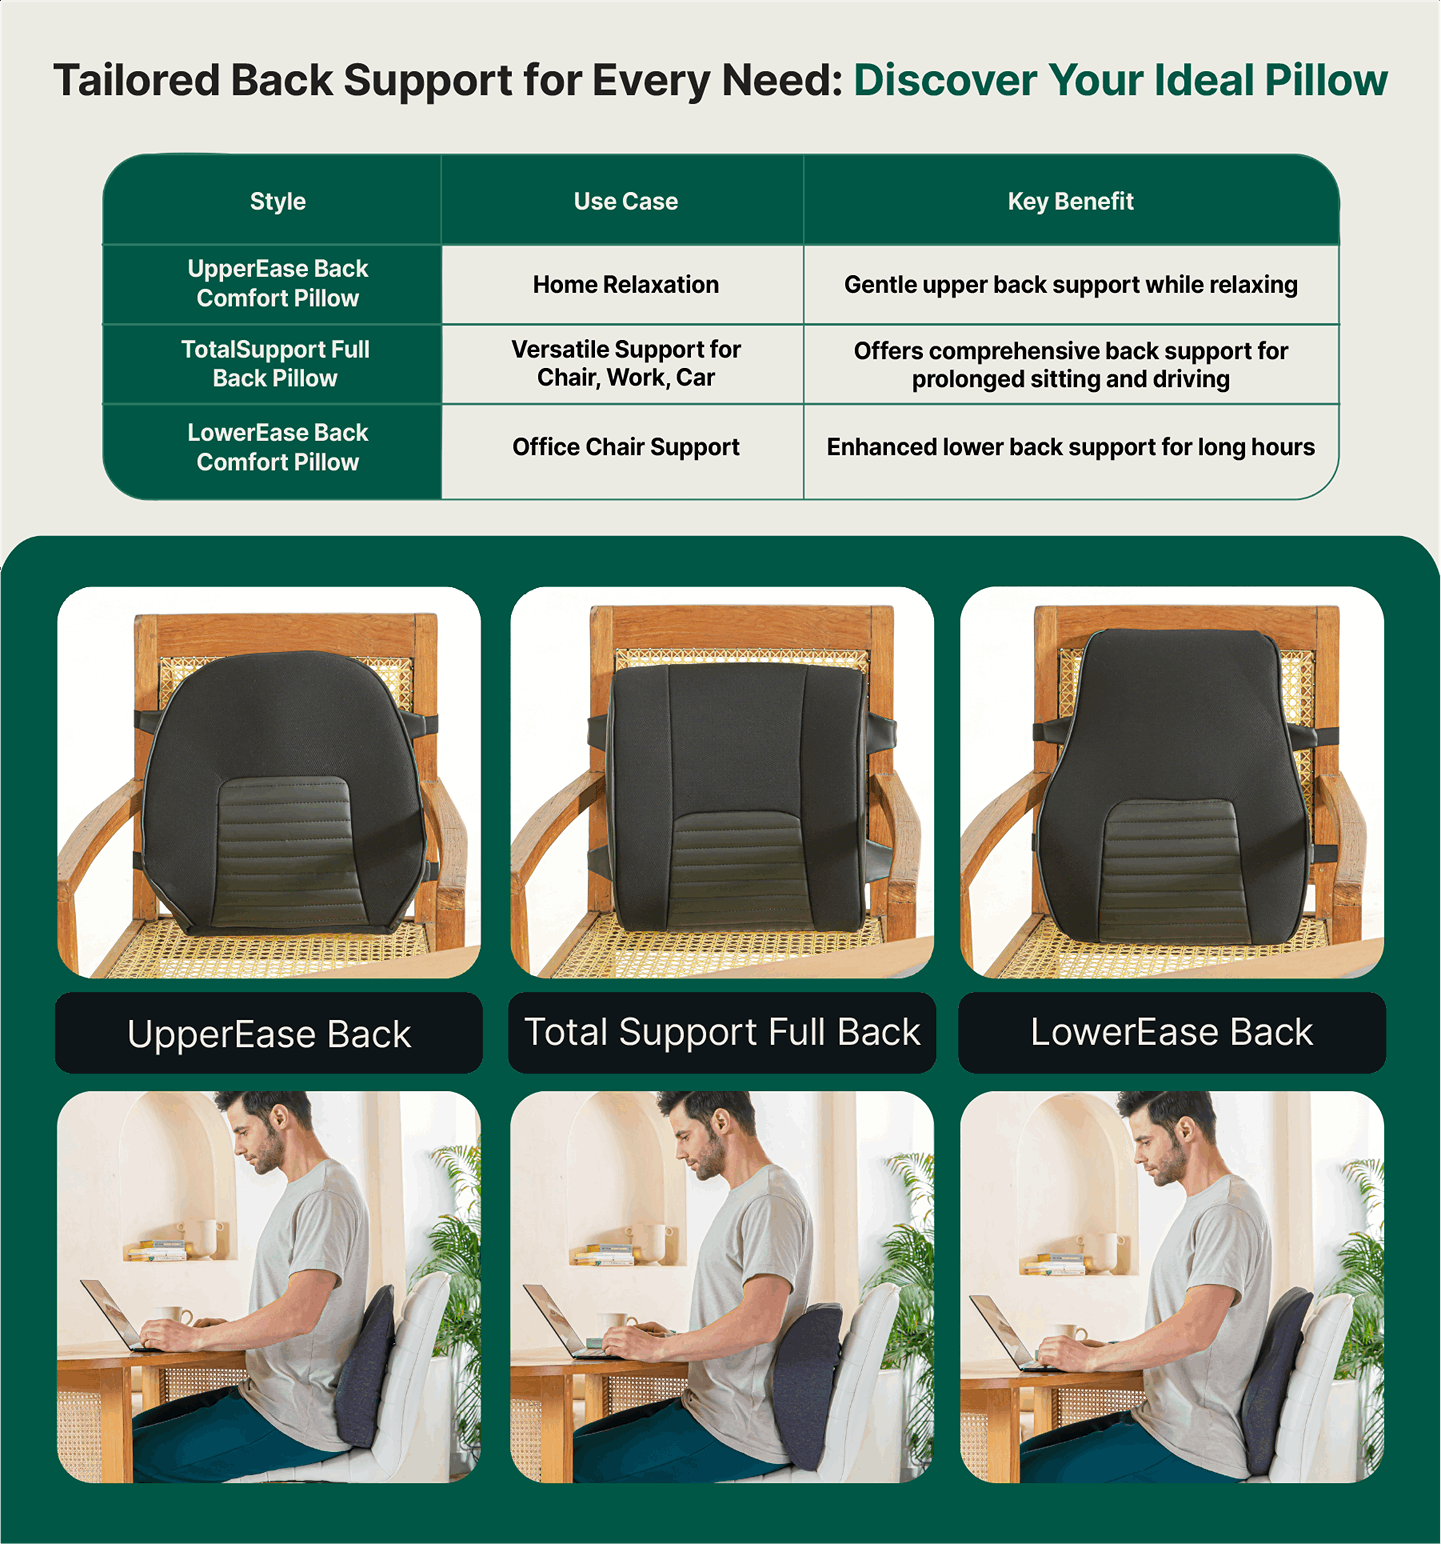 LowerEase Back Support Pillow